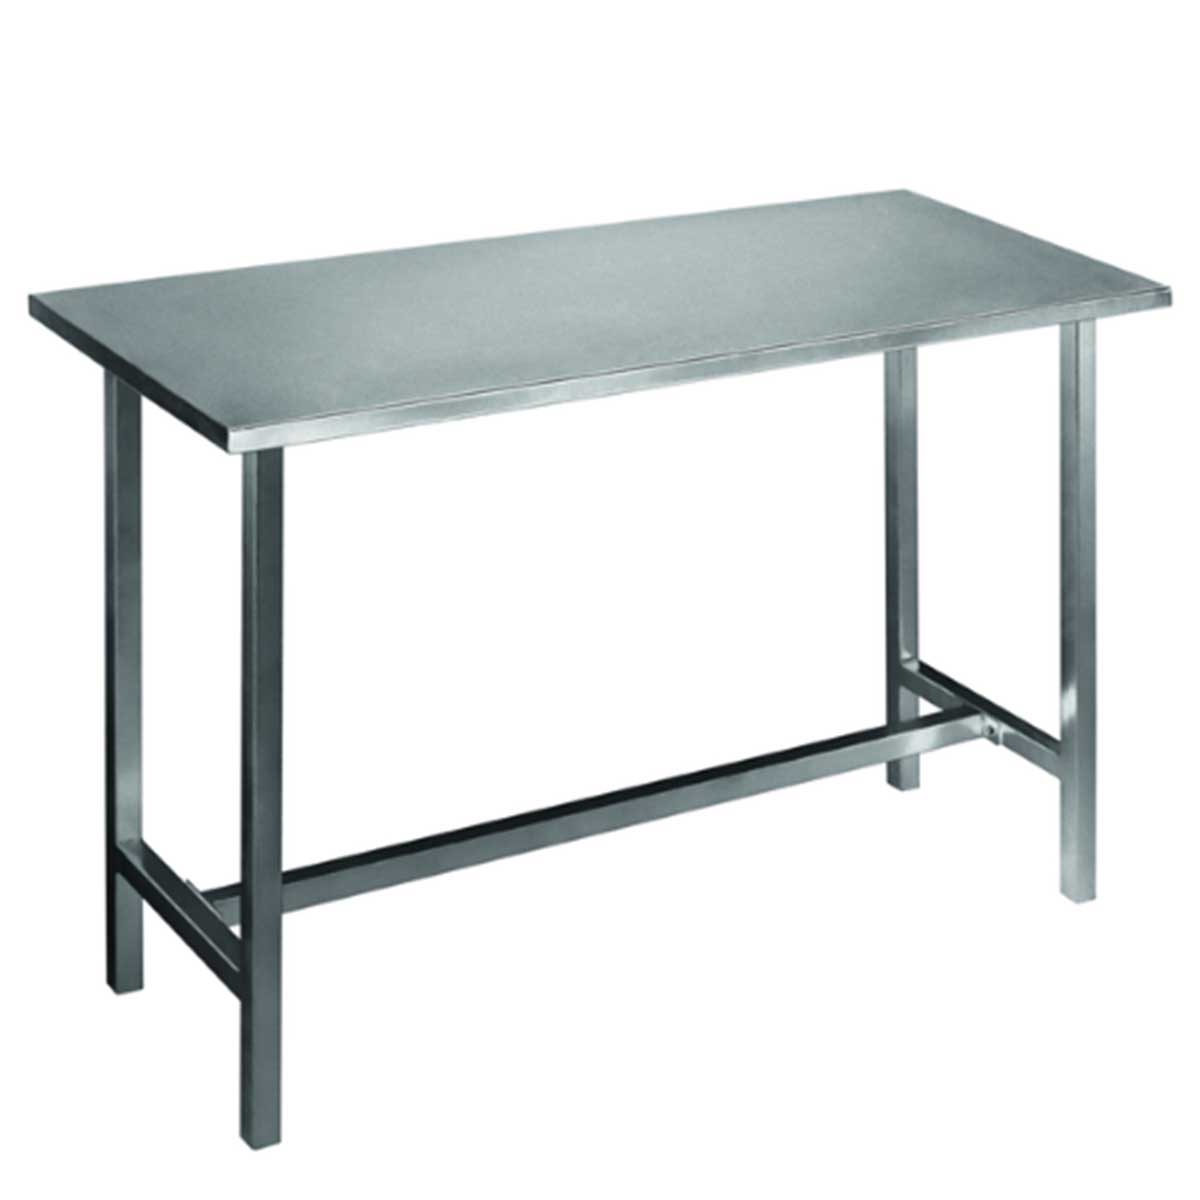 Metal Office Table Manufacturers, Suppliers in Rohini Sector 5